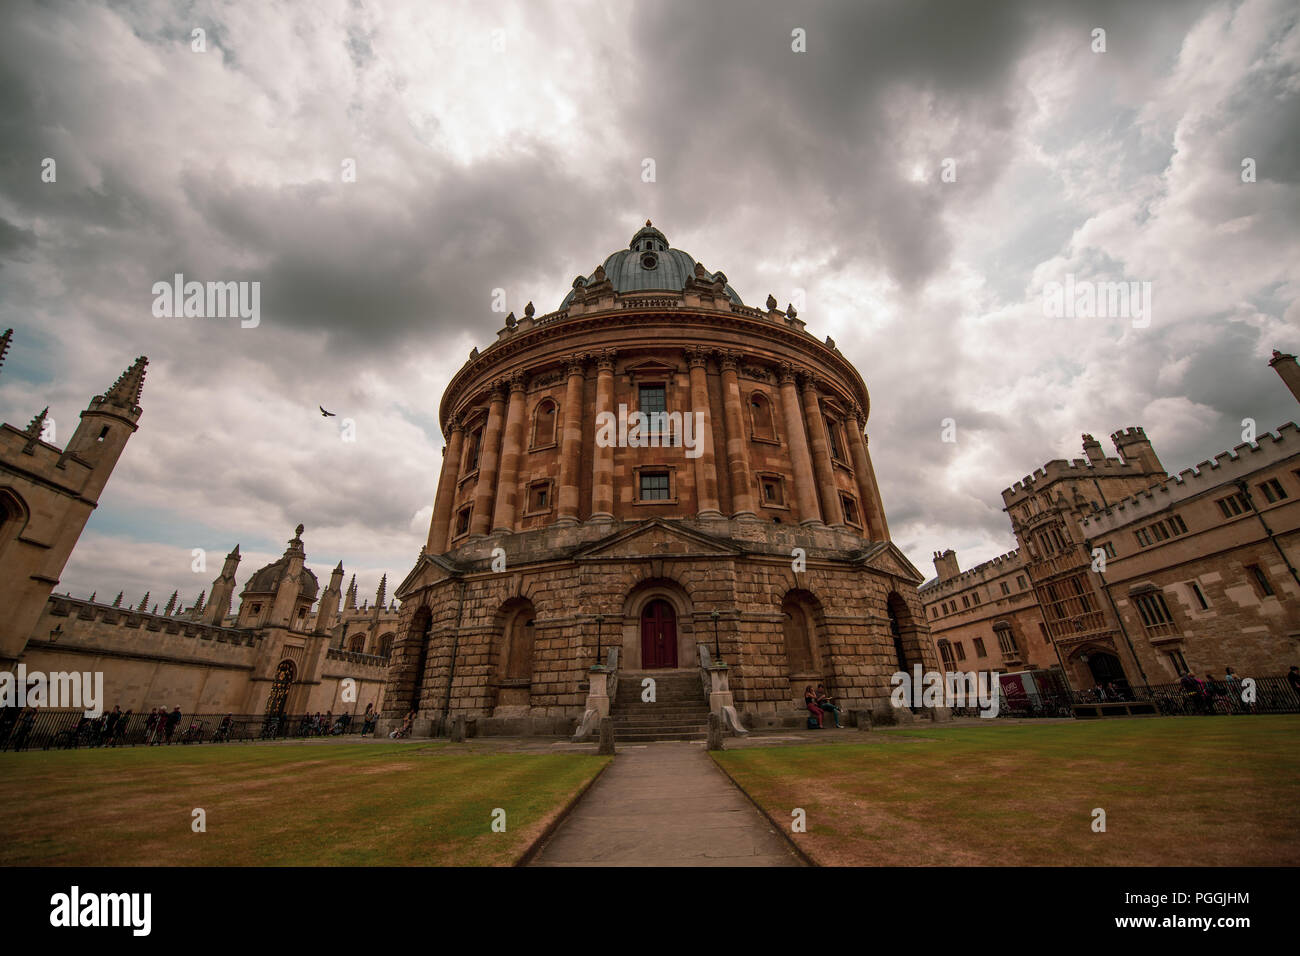 The Radcliffe Camera, part of the Bodleian library, at the University of Oxford, England, with a moody sky, an amazing piece of architecture. Stock Photo